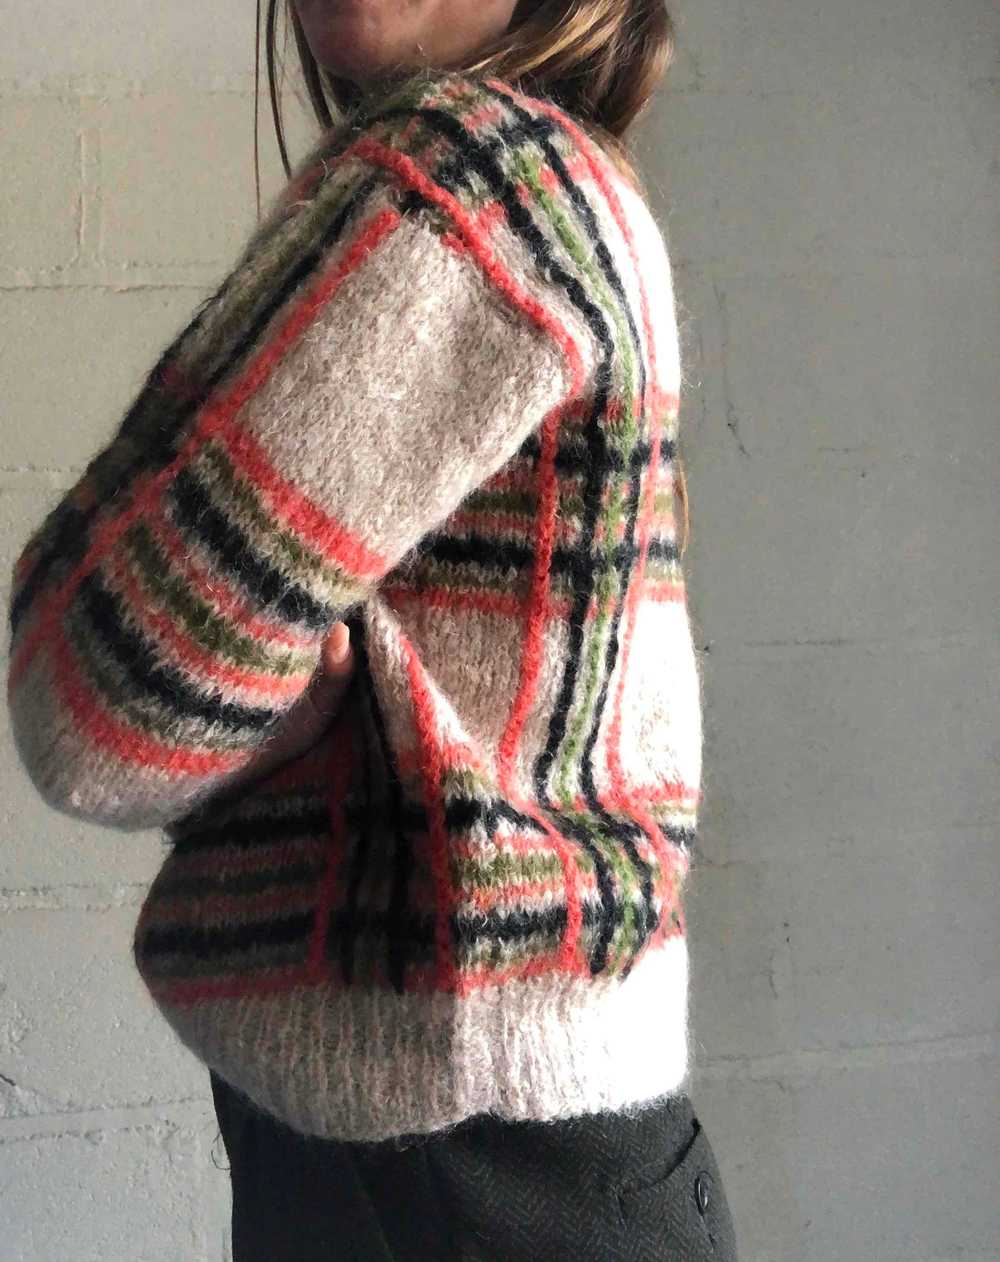 Woolen sweater - Hand knitted wool sweater - image 8